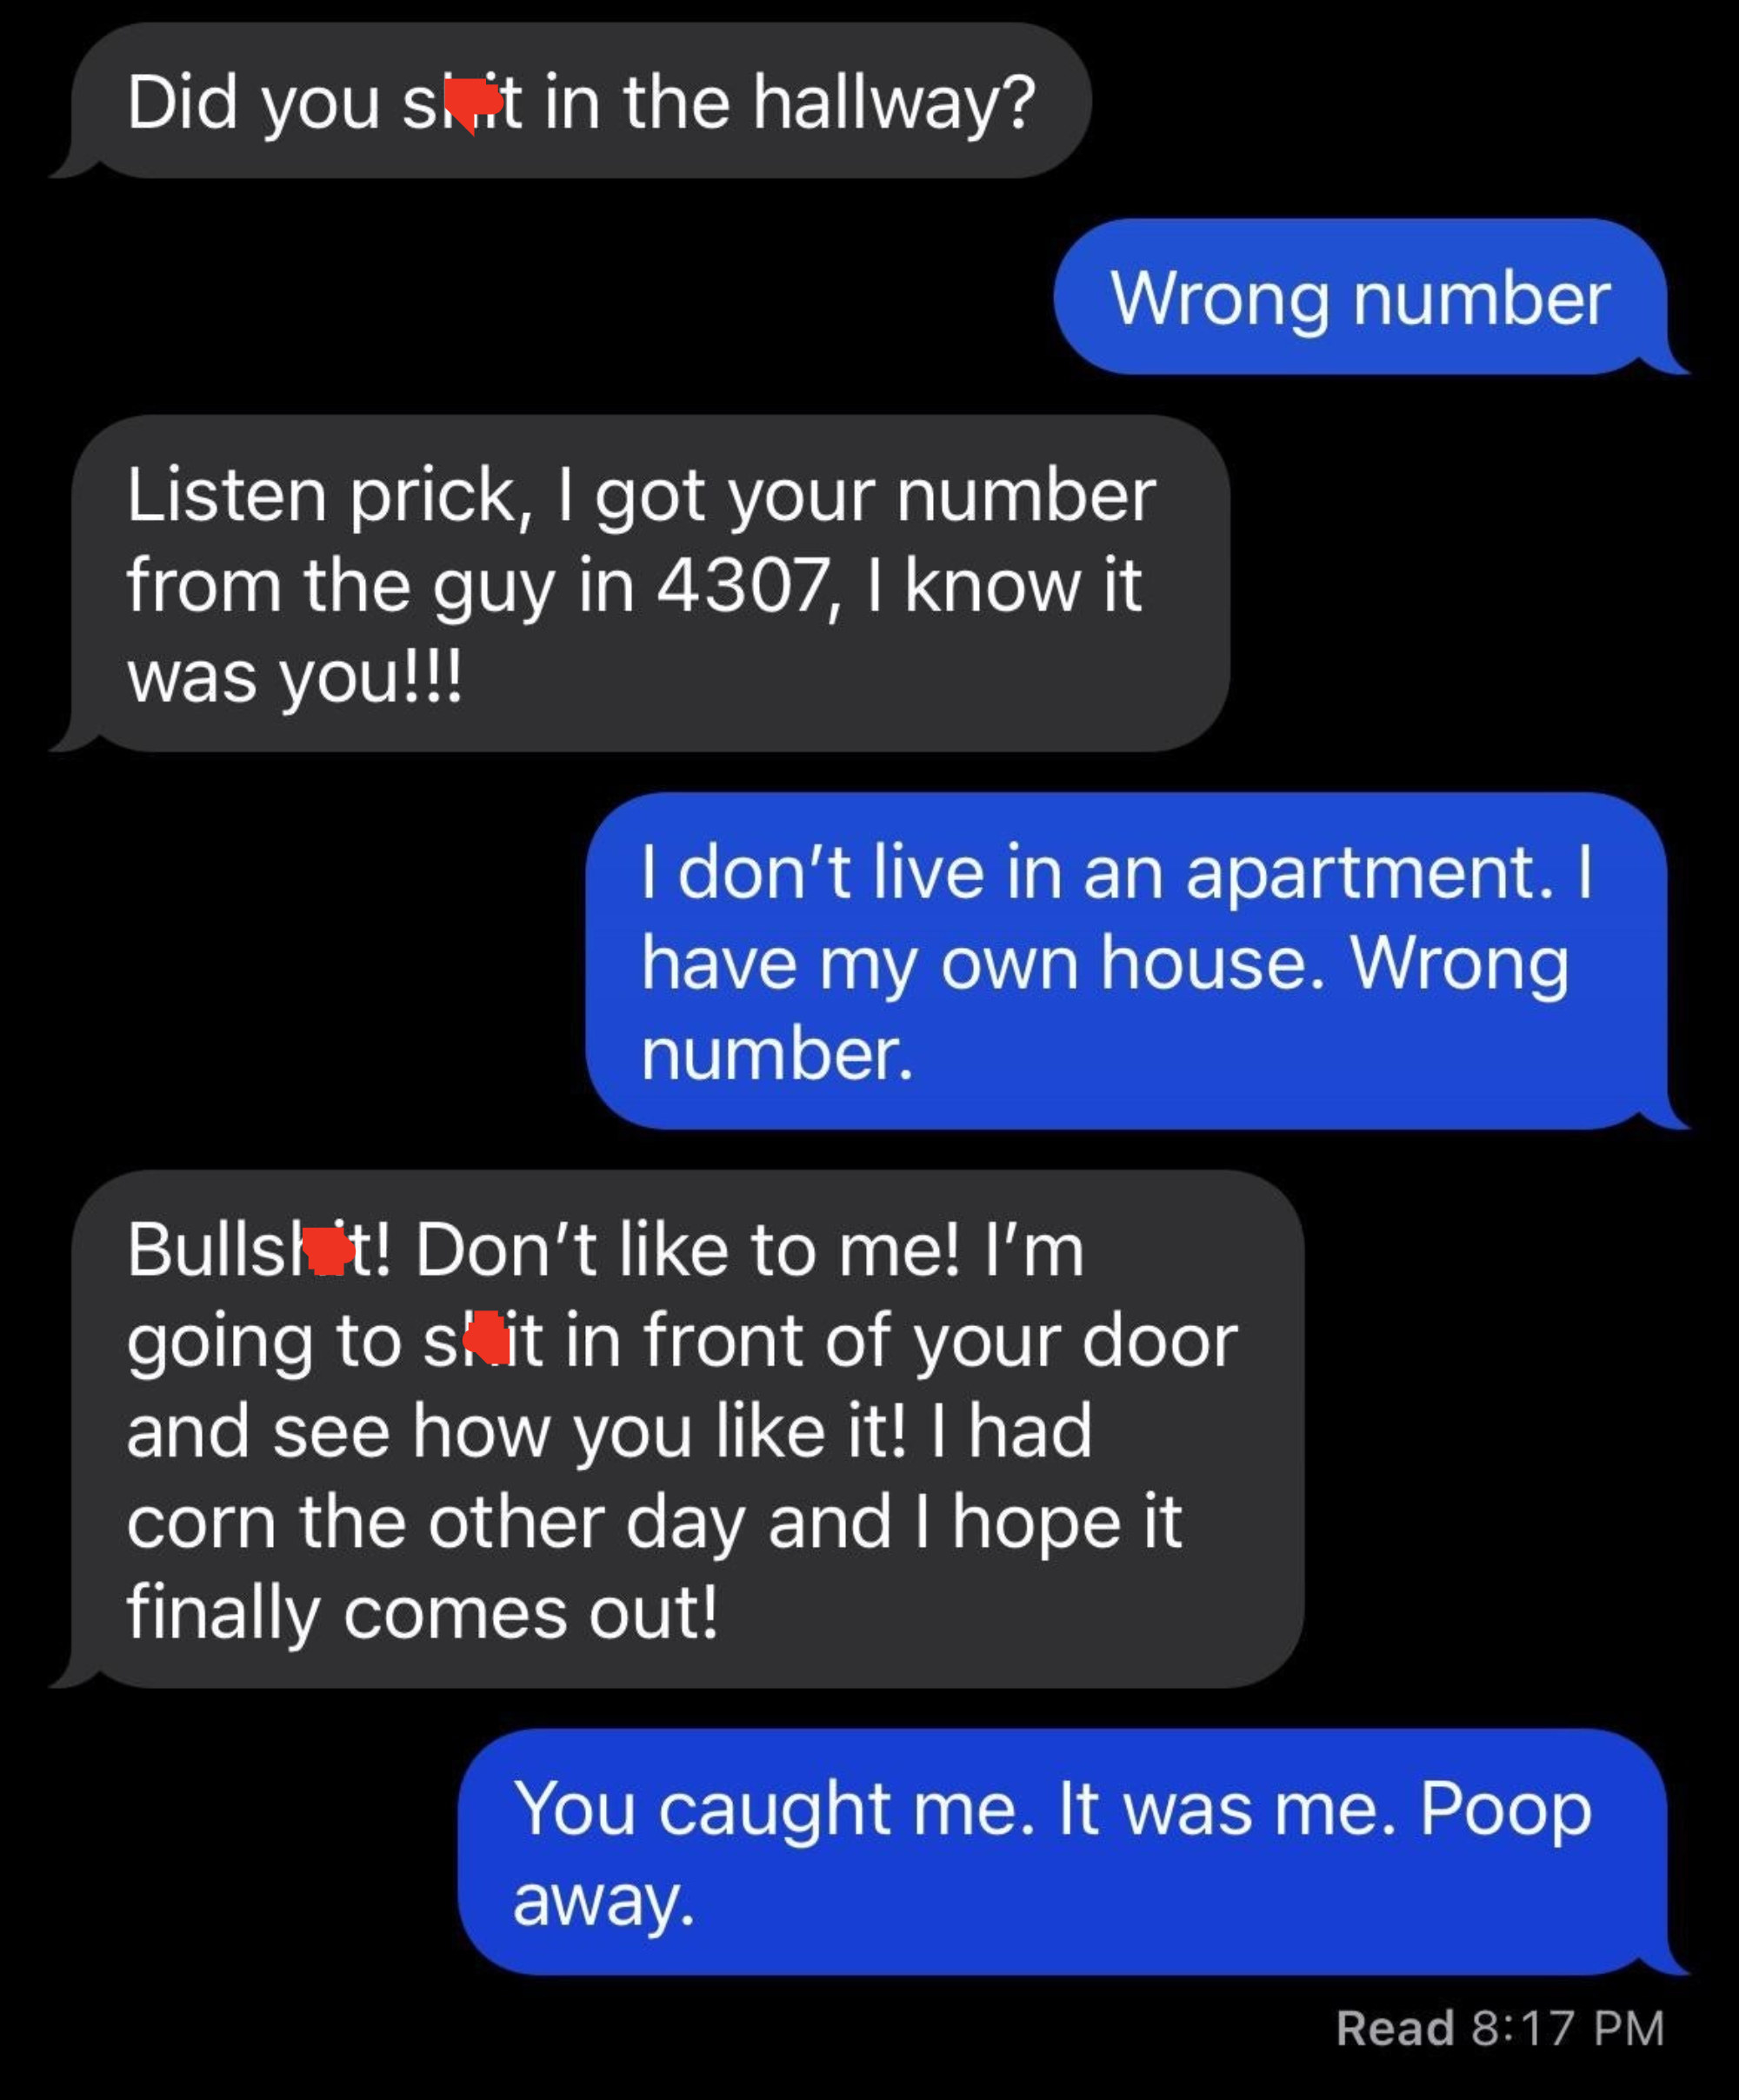 Wrong number text of someone threatening to poop on someone&#x27;s doorstep even after they said they live in a a house, because they think they pooped in the apartment building hallway